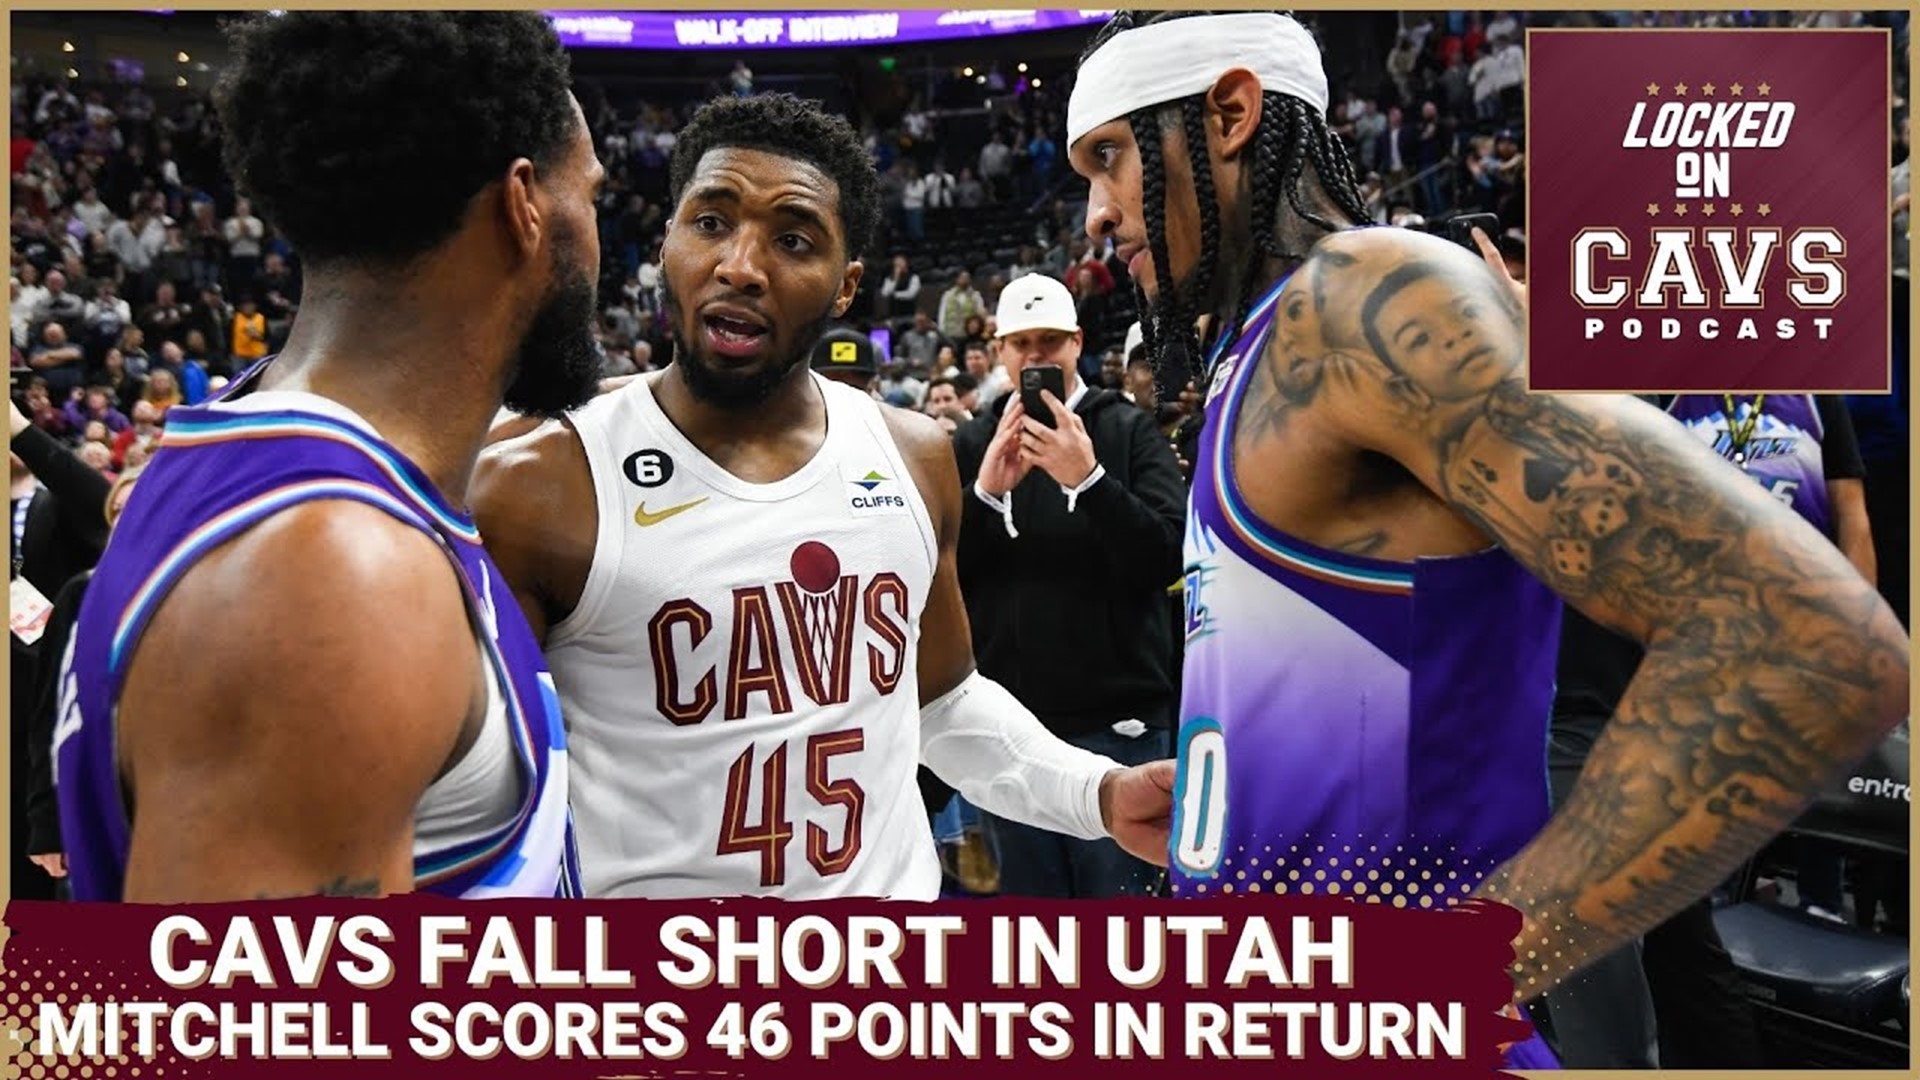 Chris Manning discusses the Cavs’ loss to the Jazz in Donovan Mitchell’s return to Utah and more team updates.